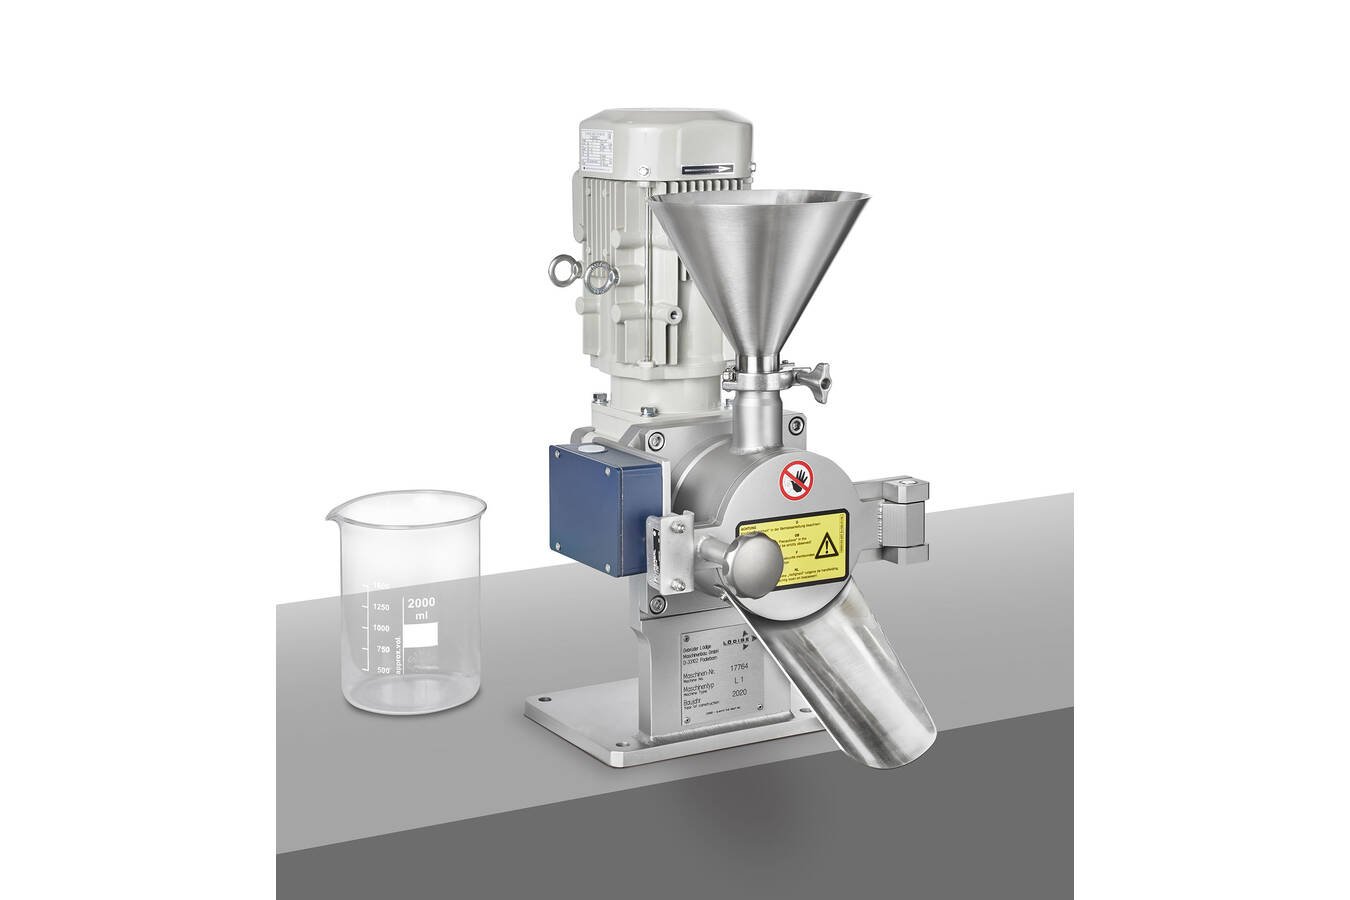 Lödige Ploughshare® laboratory mixer type L 1 Lödige builds the smallest machine in its company history